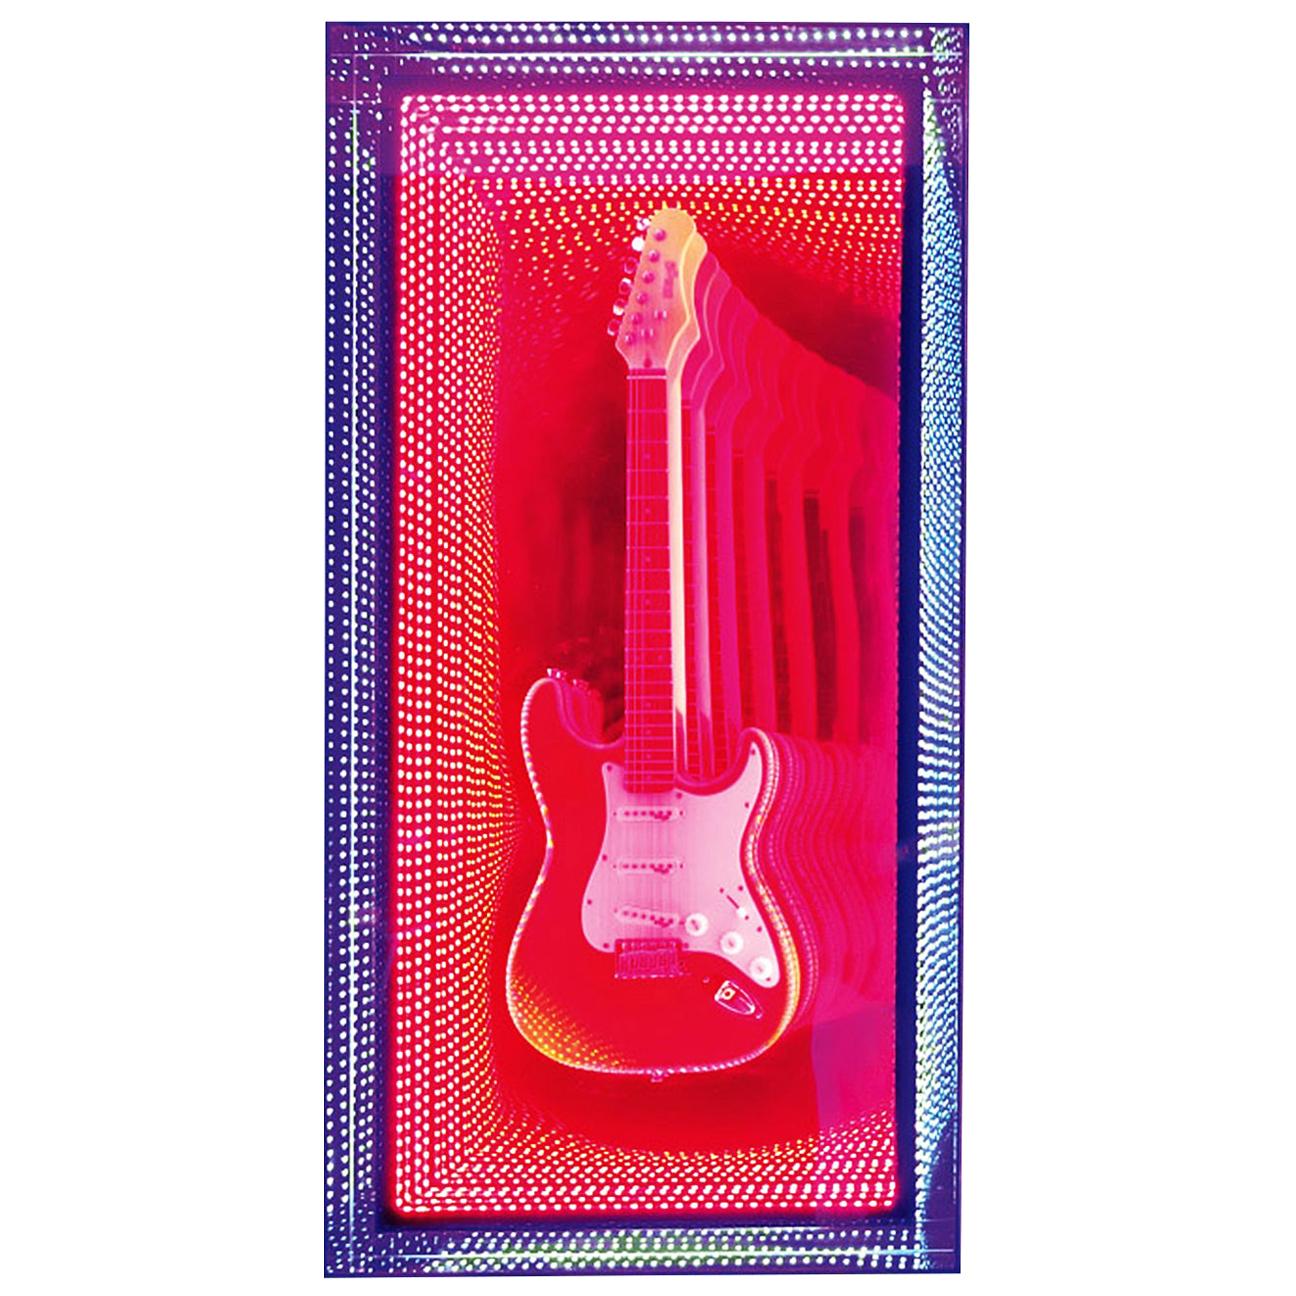 Guitar Infiny Wall Decoration Mirror with Led Lights For Sale